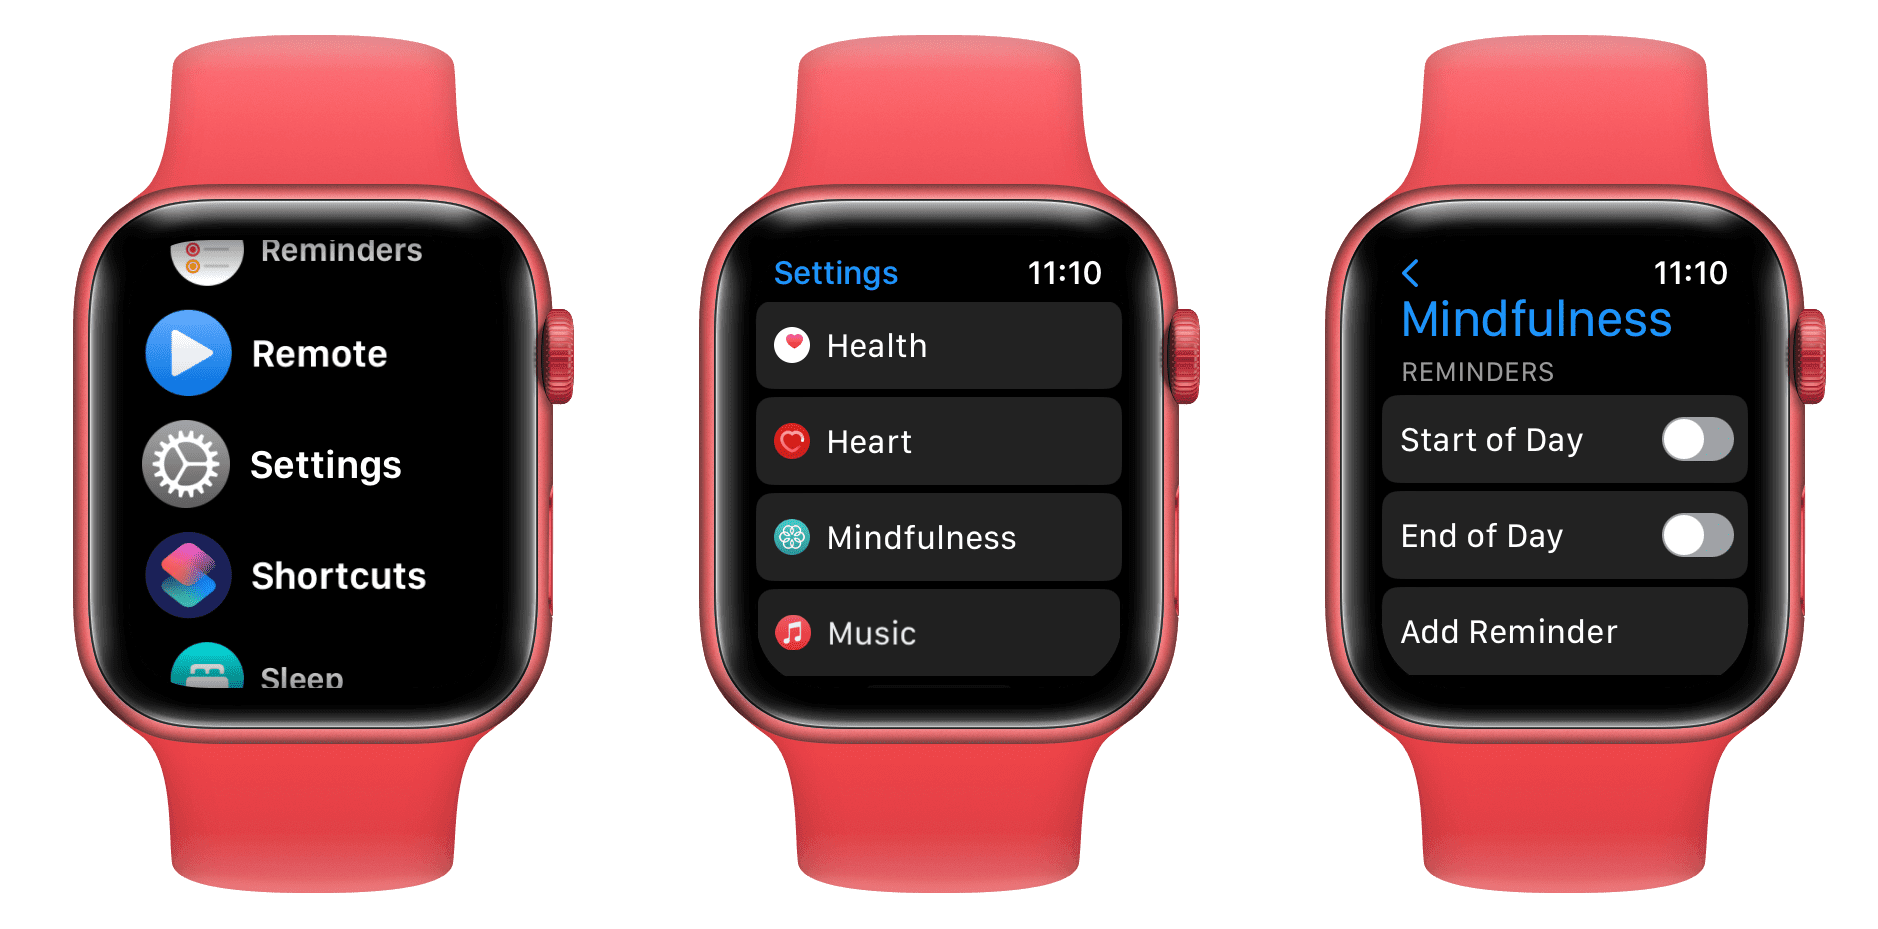 Disable Mindfulness reminders from Apple Watch settings